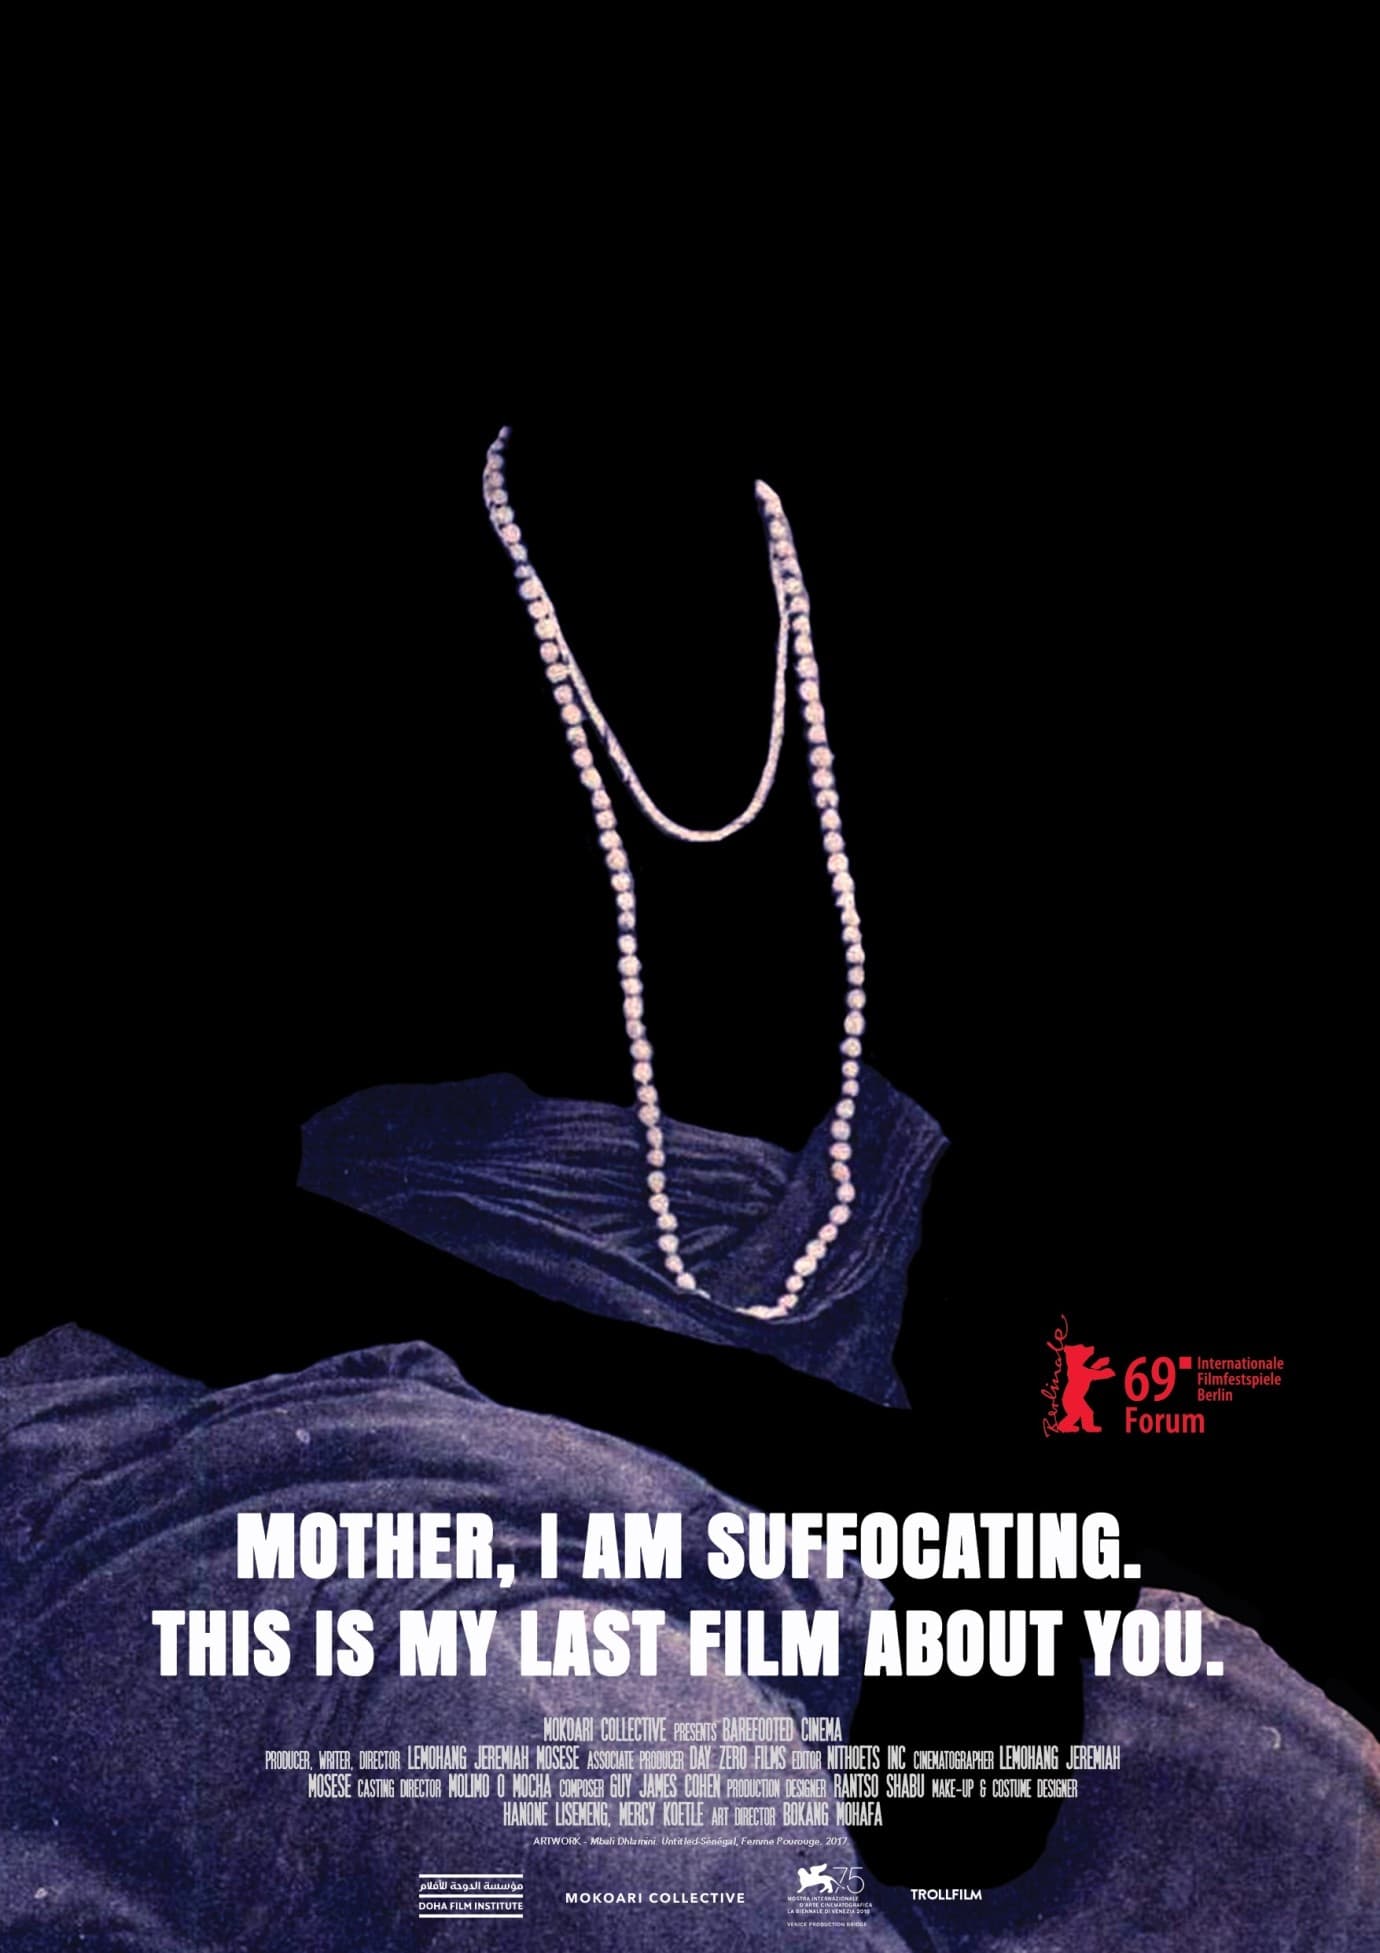 Mother, I Am Suffocating. This Is My Last Film About You.